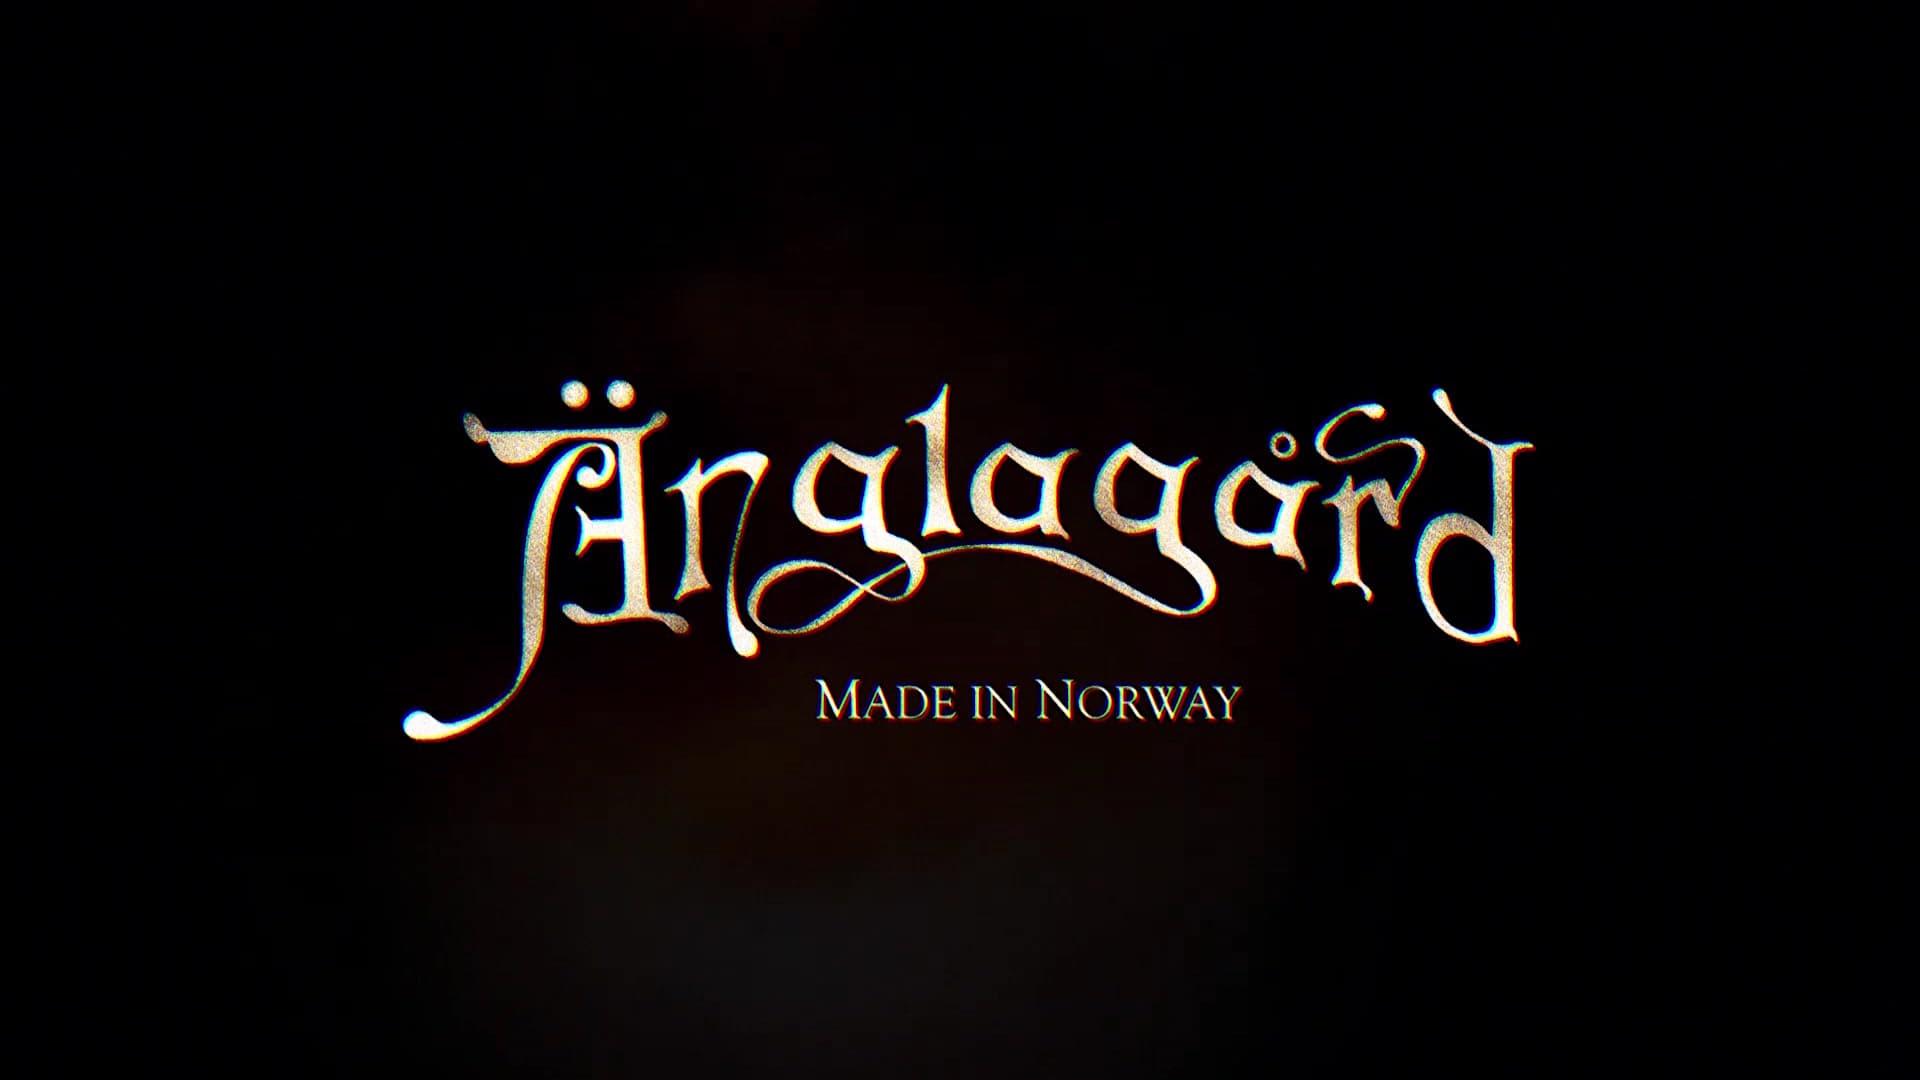 Anglagard - Live: Made in Norway backdrop